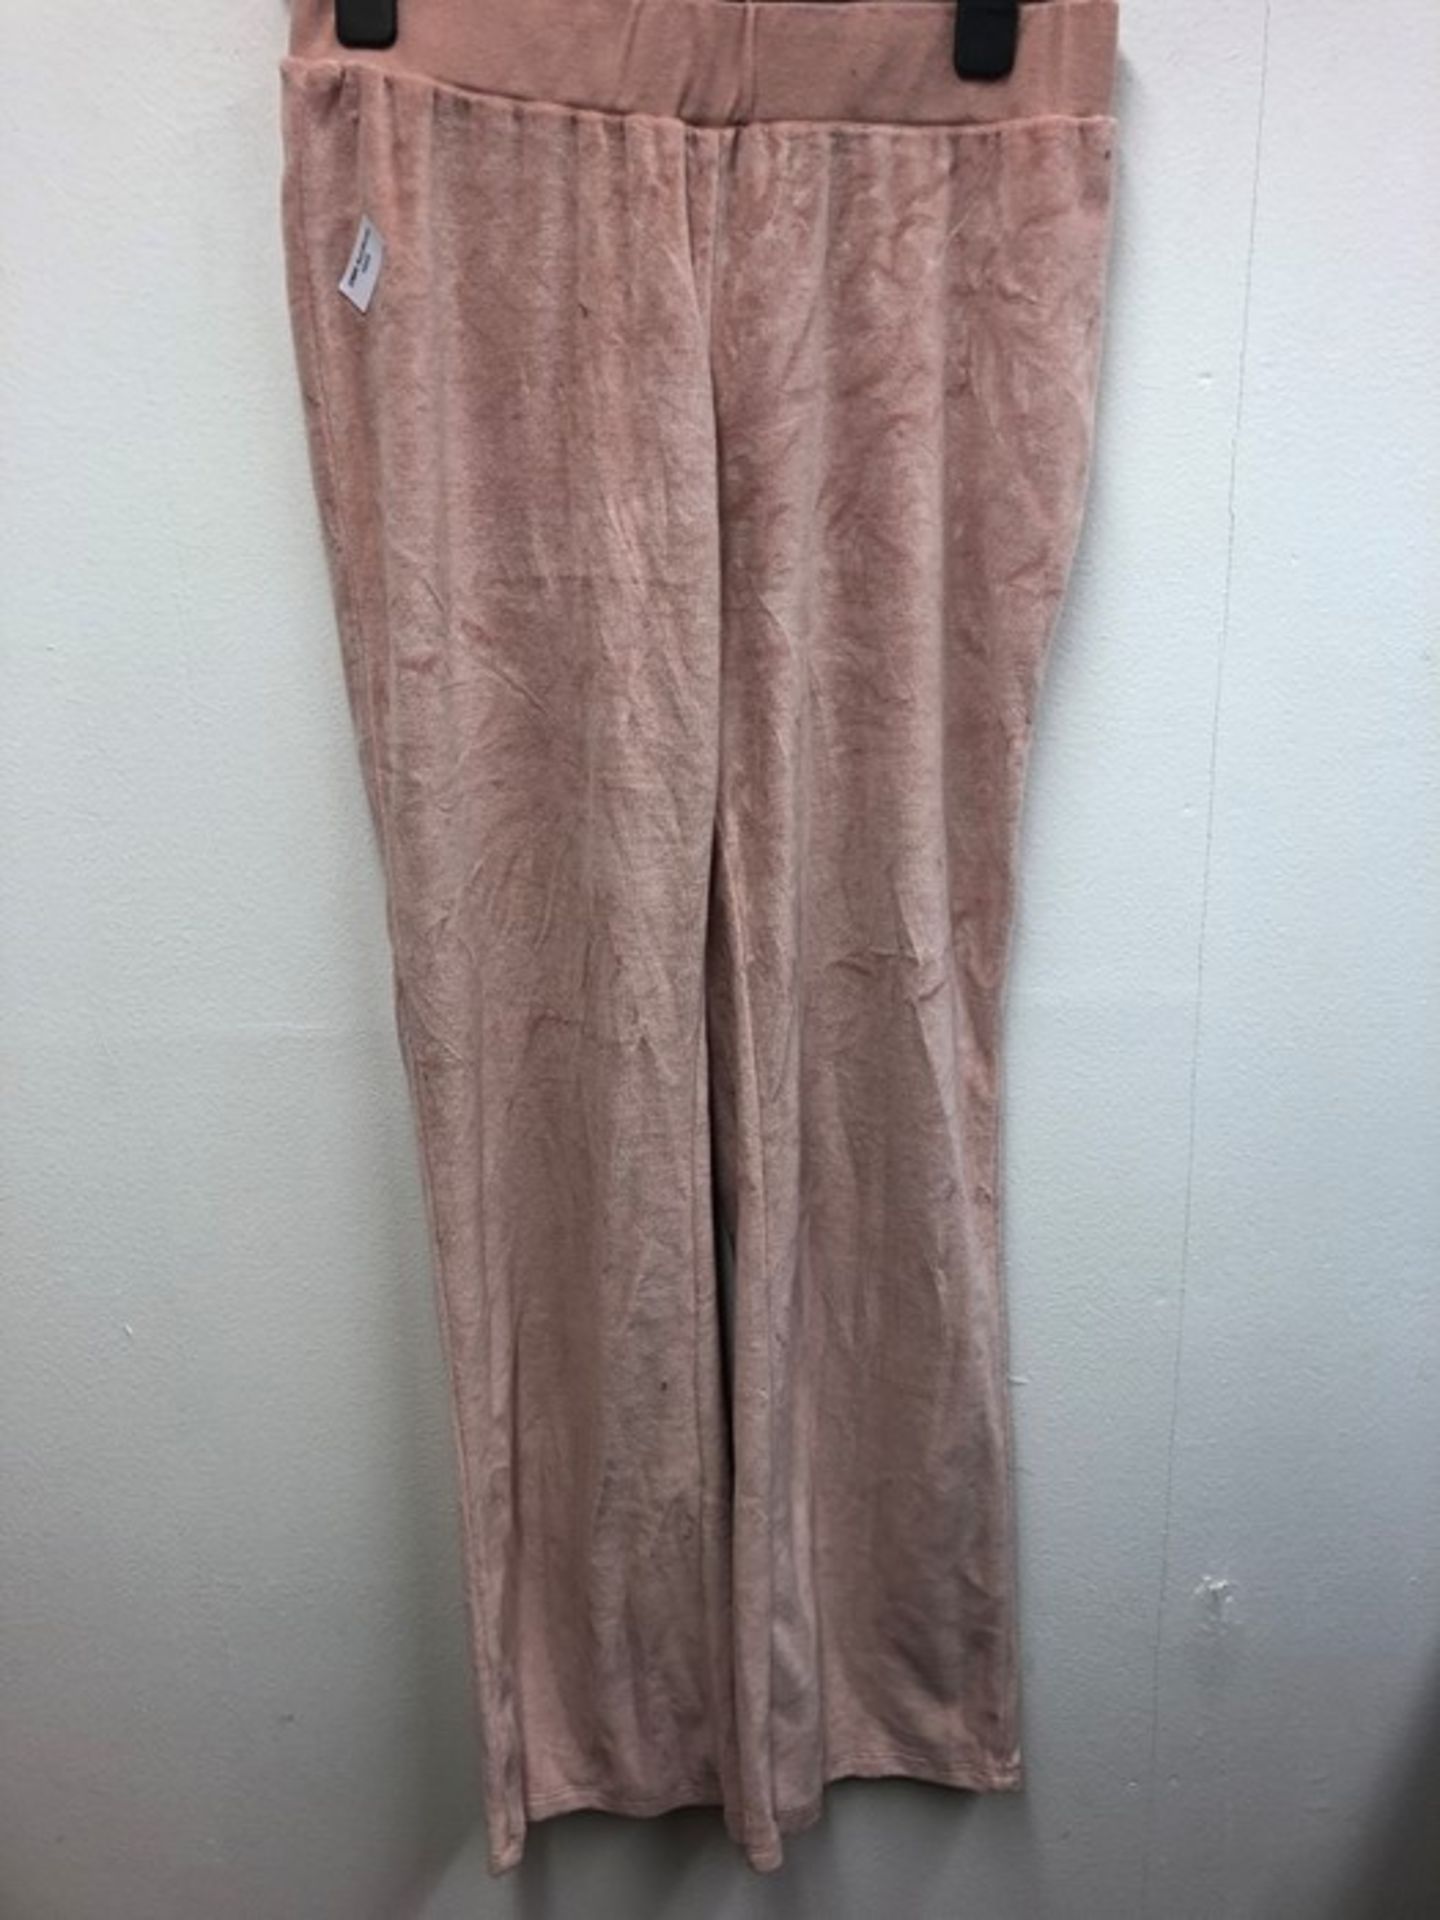 1 PAIR OF LA REDOUTE PANTS IN PINK / SIZE 10/12 (V